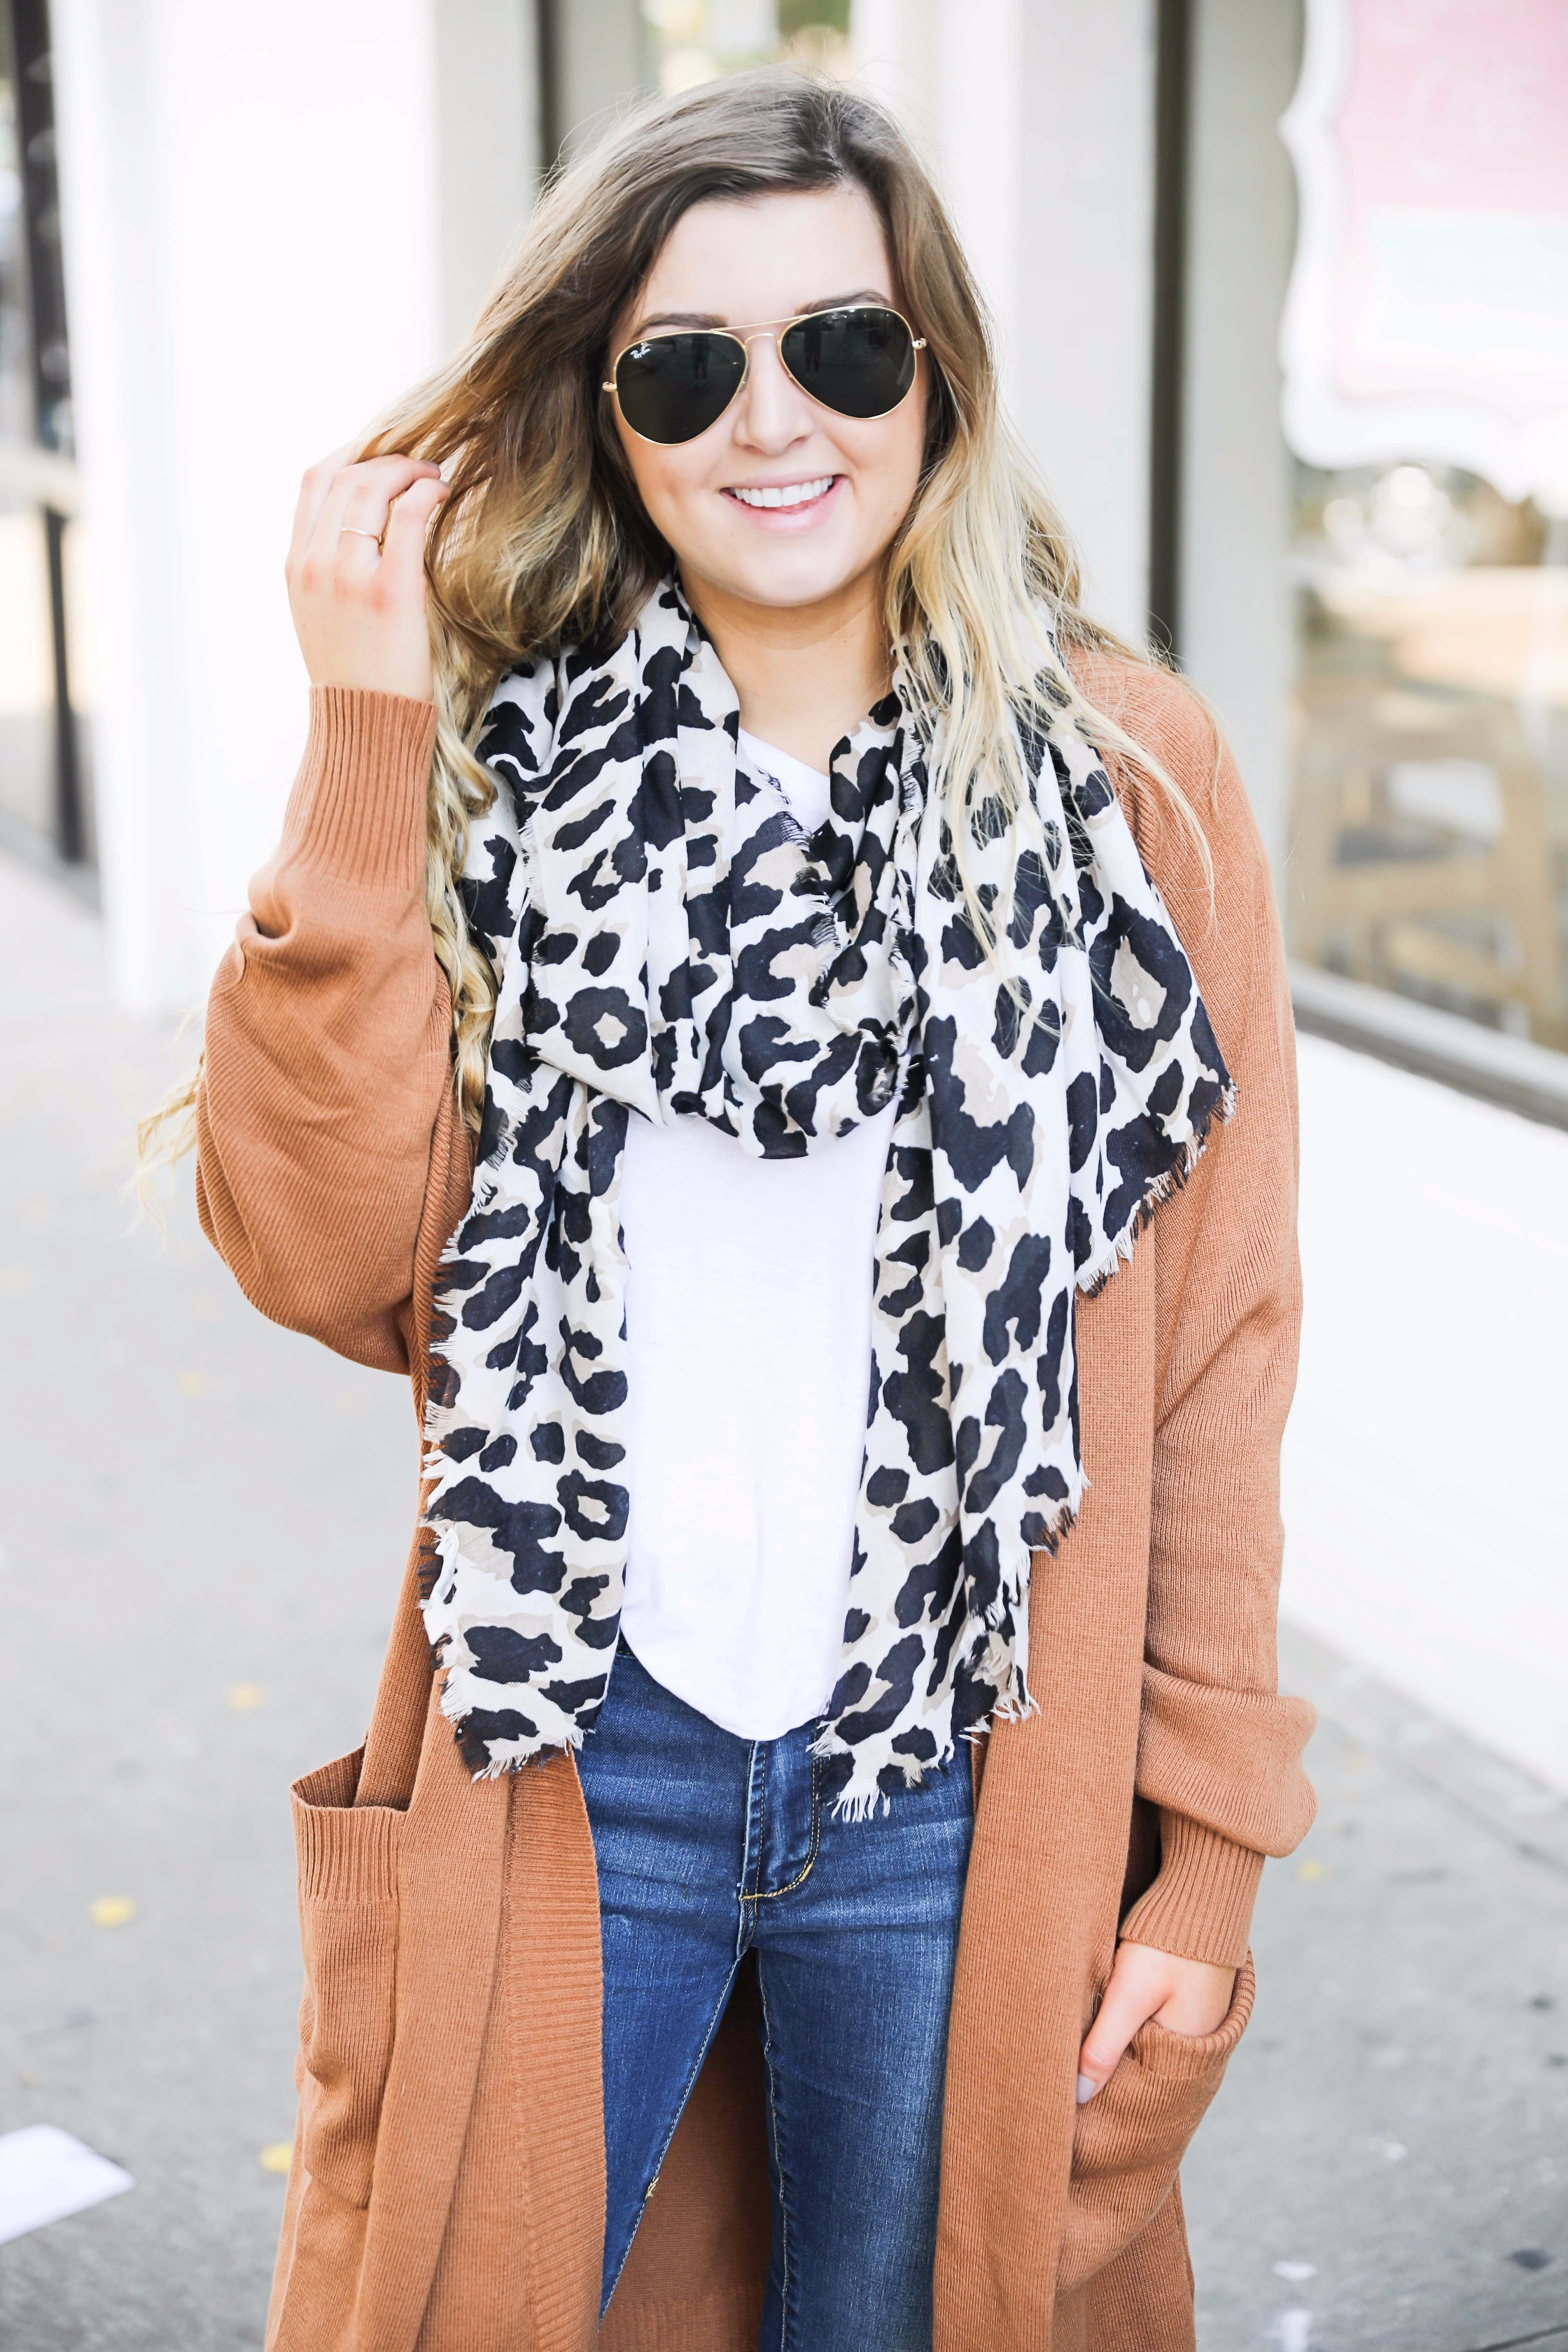 Adorable leopard scarf paired with a burnt orange cardigan! This is the fall outfit you need in your closet! Leopard is so in right now and this scarf is a necessity! The burnt orange cardigan in a staple! Find the details on fashion blog daily dose of charm by lauren lindmark